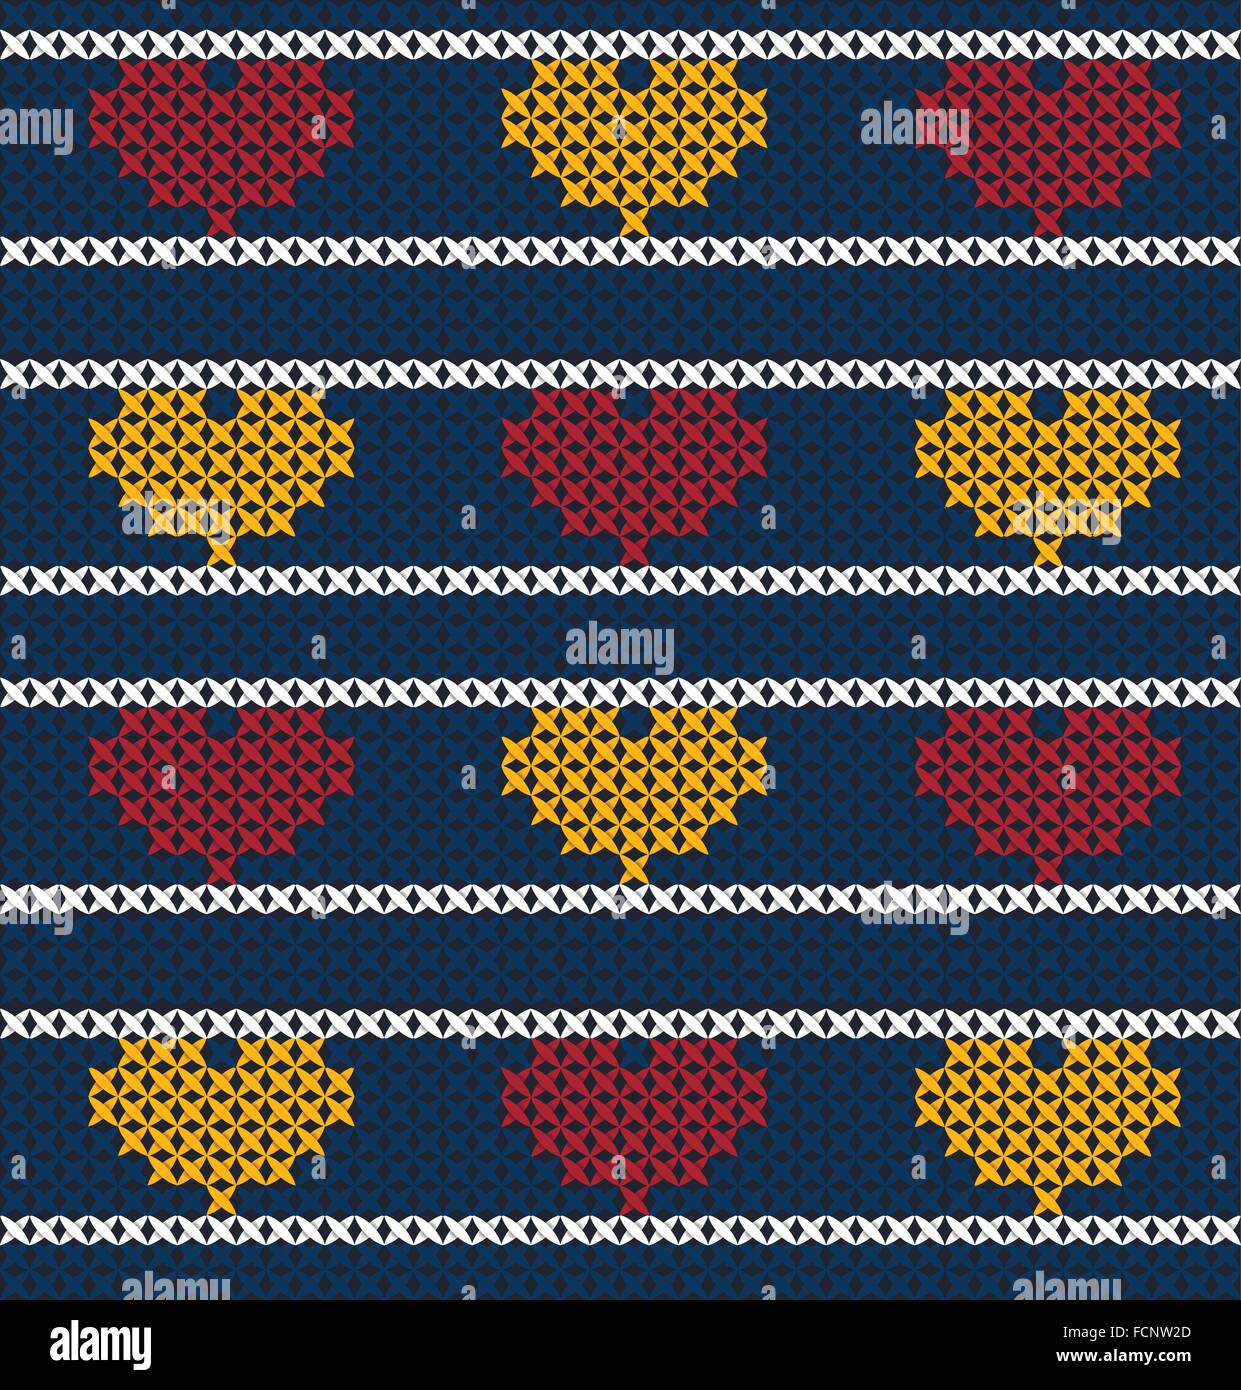 knit pattern yellow and red heart Stock Vector